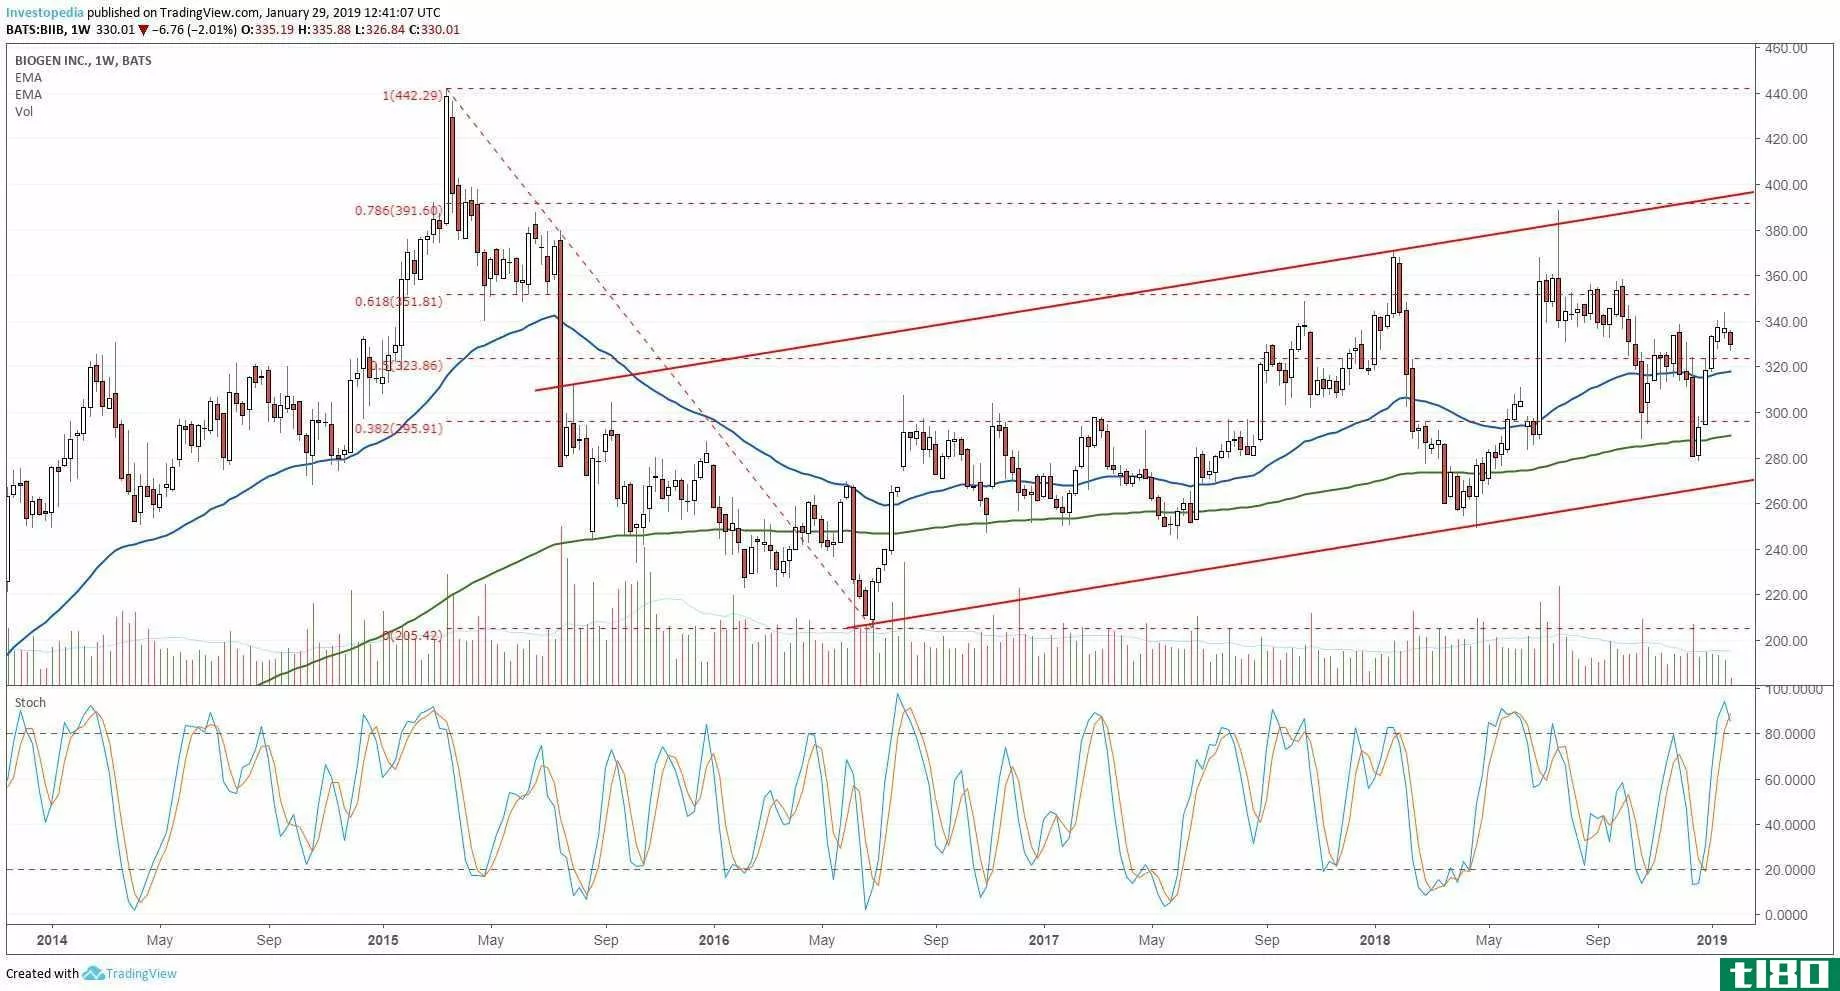 Weekly technical chart showing the performance of Biogen Inc. (BIIB)